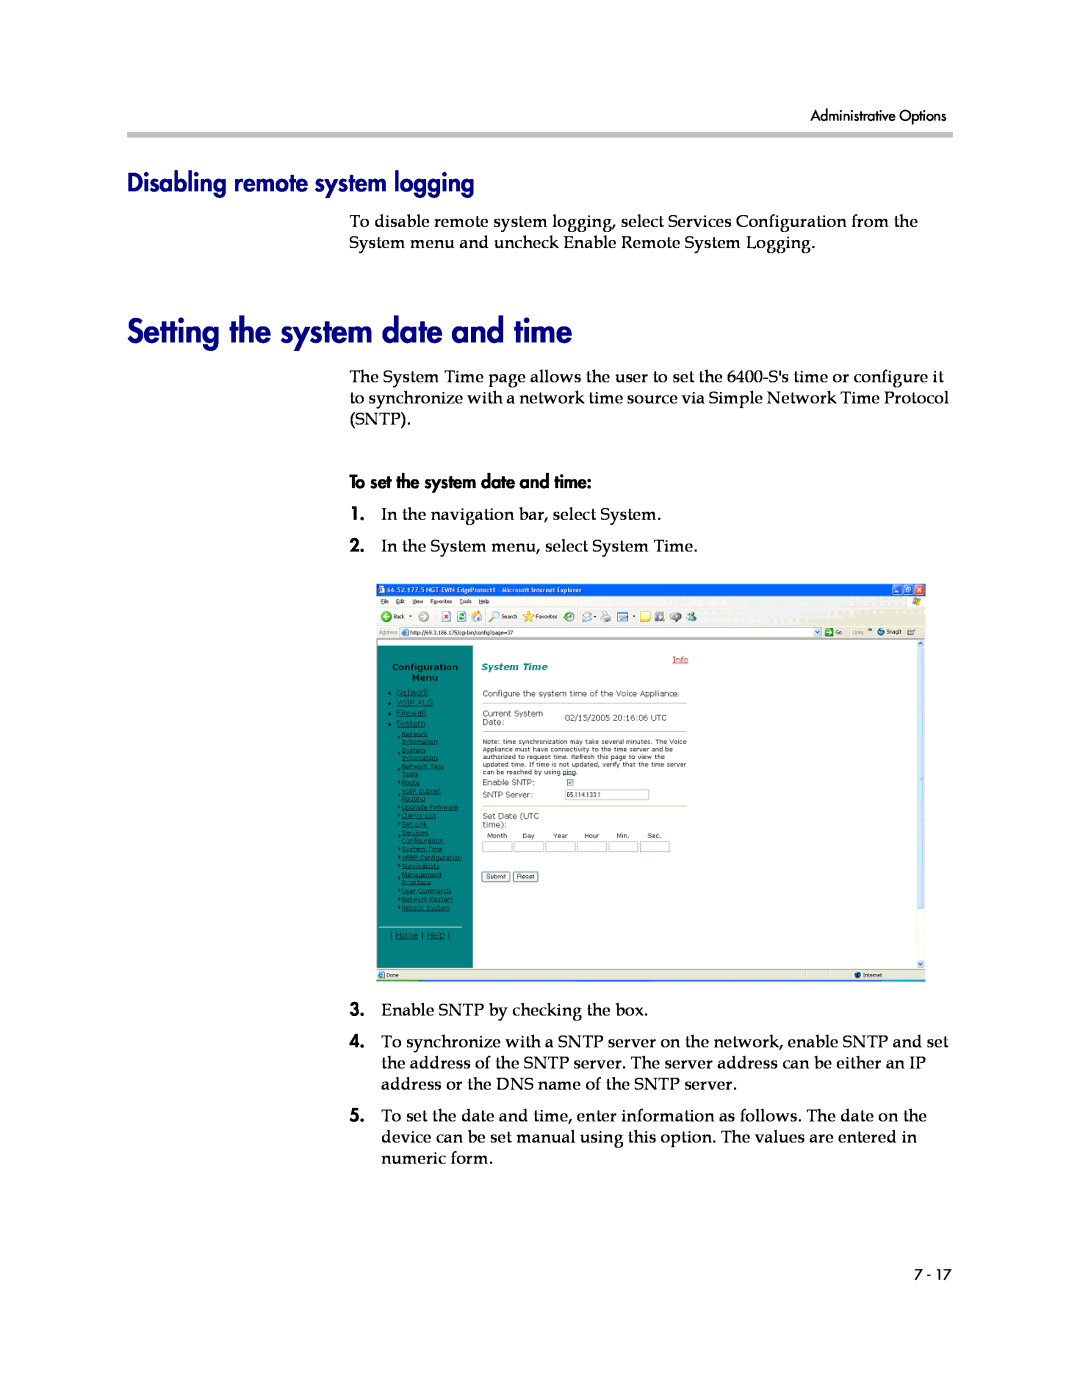 Polycom 6400-S manual Setting the system date and time, Disabling remote system logging 